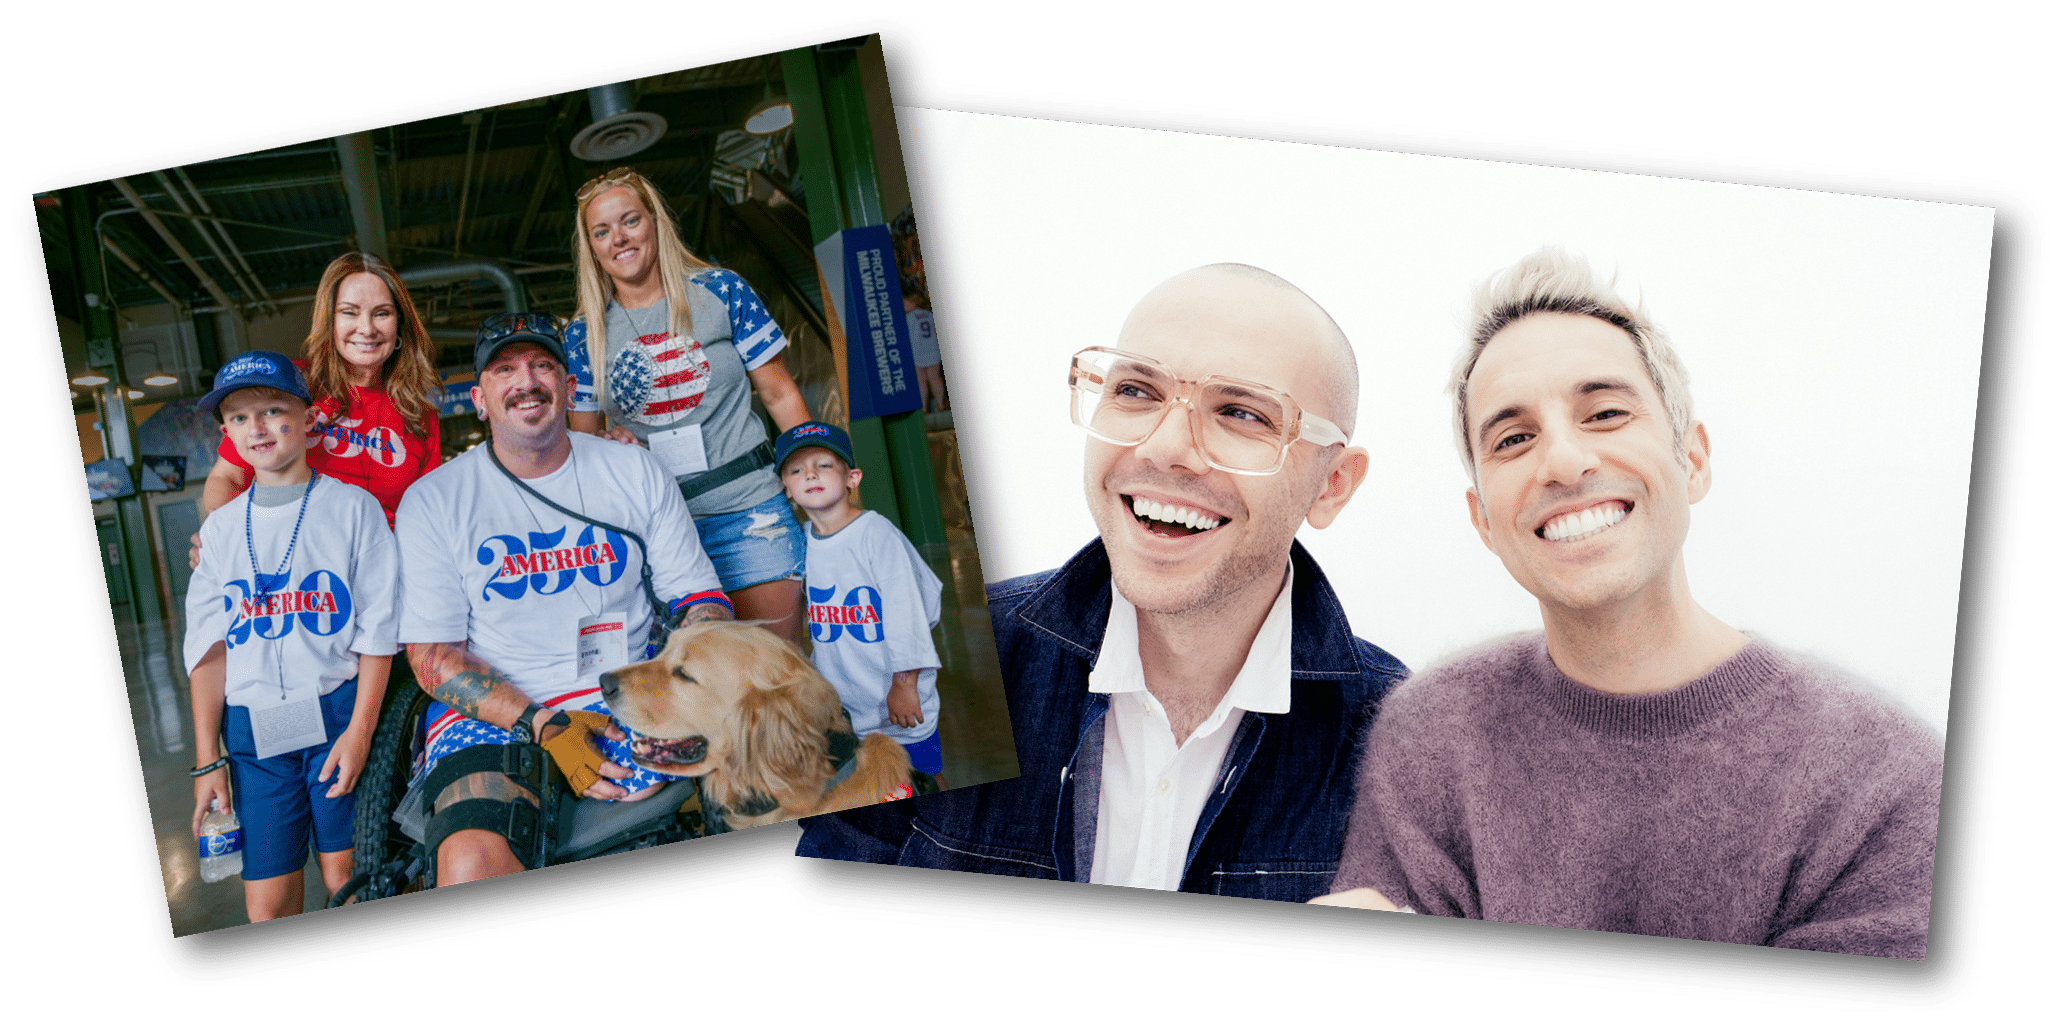 Two photos show a family in shirts that say "America 250" and two men smiling at the camera